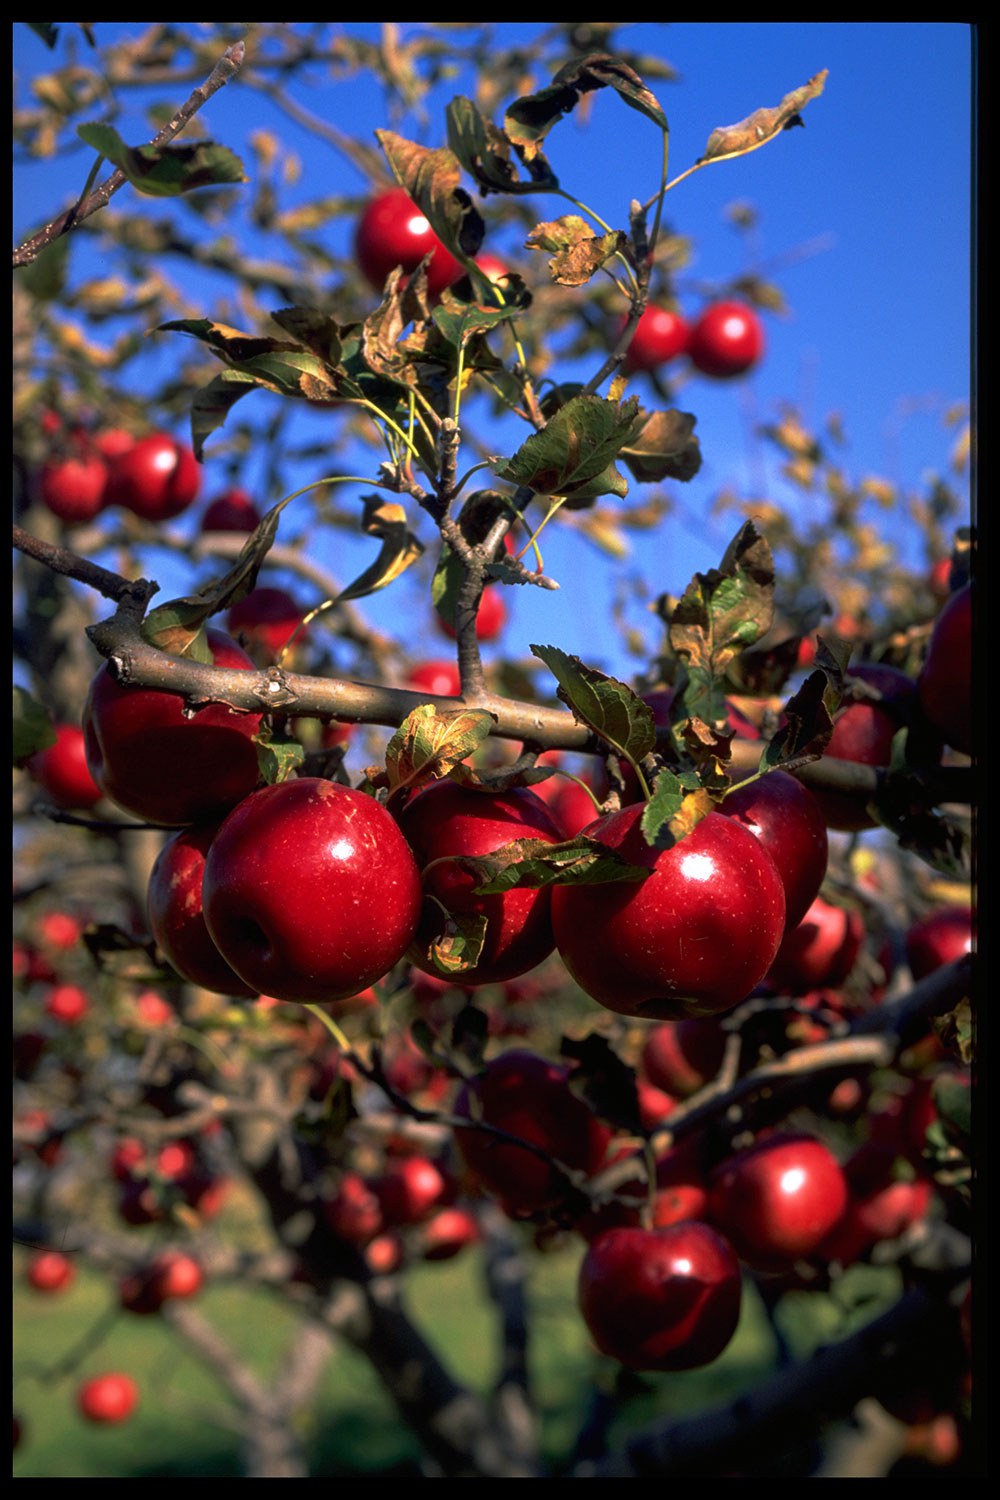 Apples at an orchard